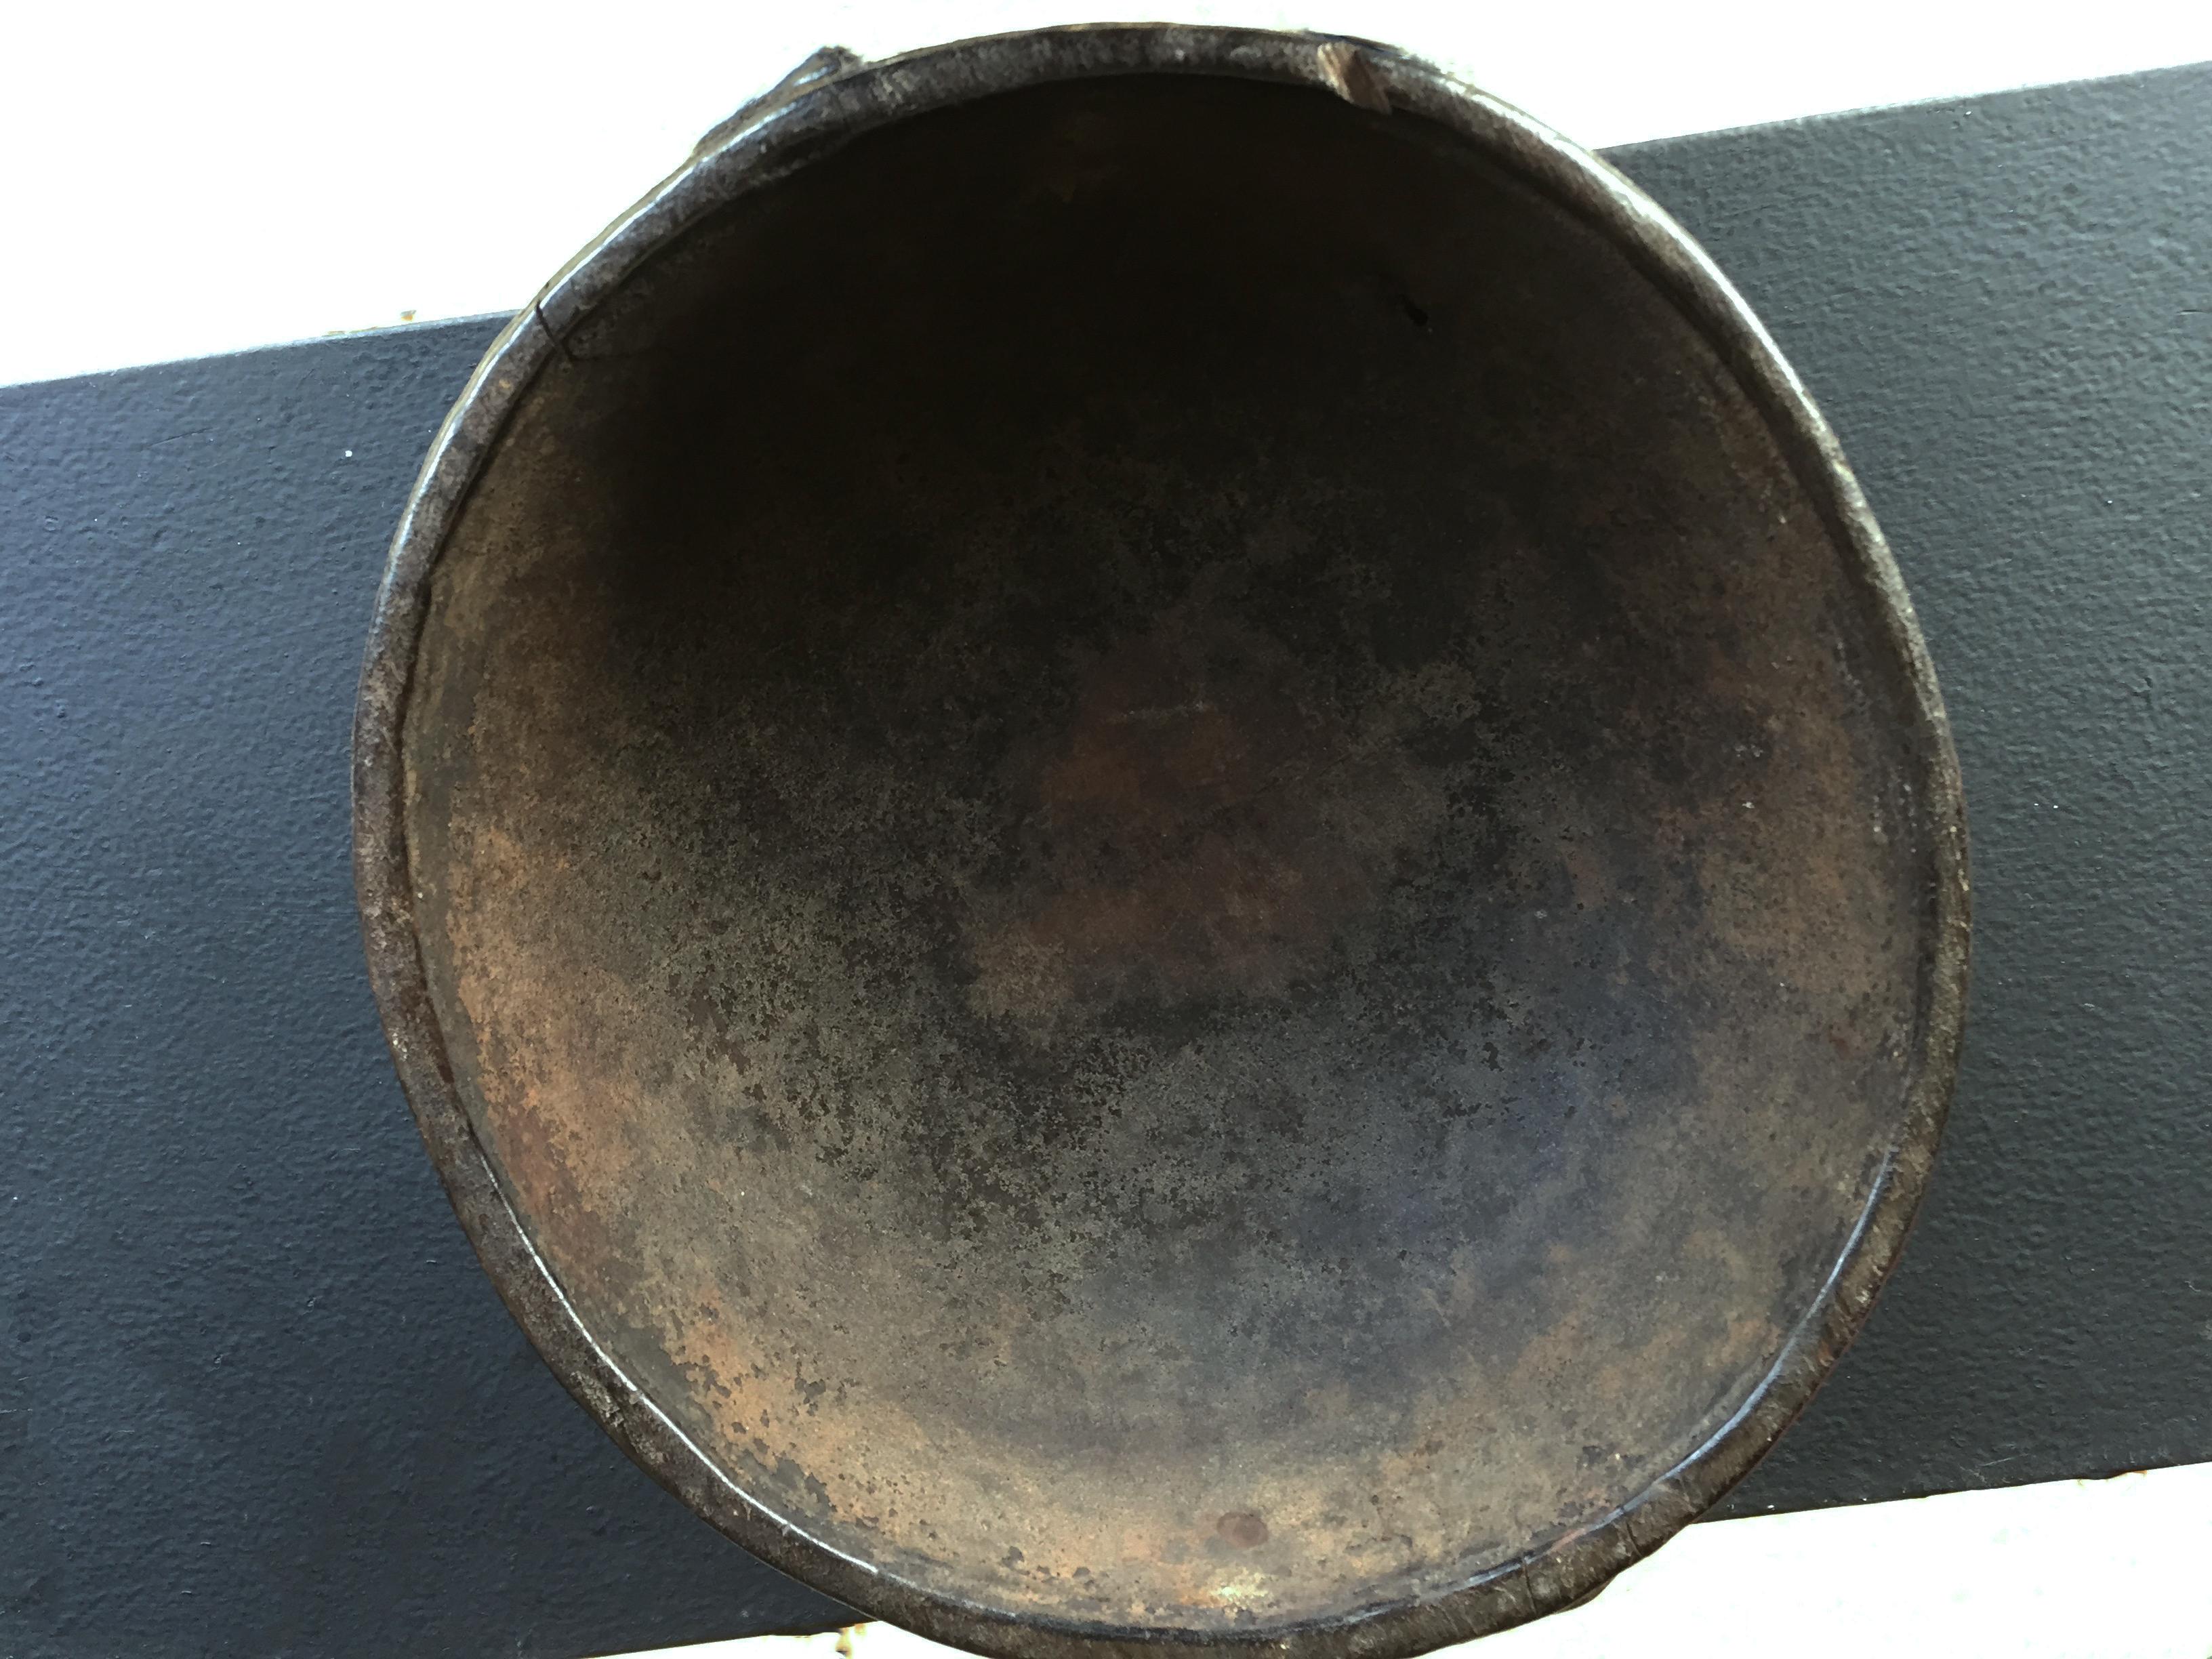 Boiken bowl, shallow circular form, the underside carved in shallow relief with a star design,
stylised motifs within its border leading the two handles with notched edge and two lovely well worn faces on the edge , black patina, wear according to